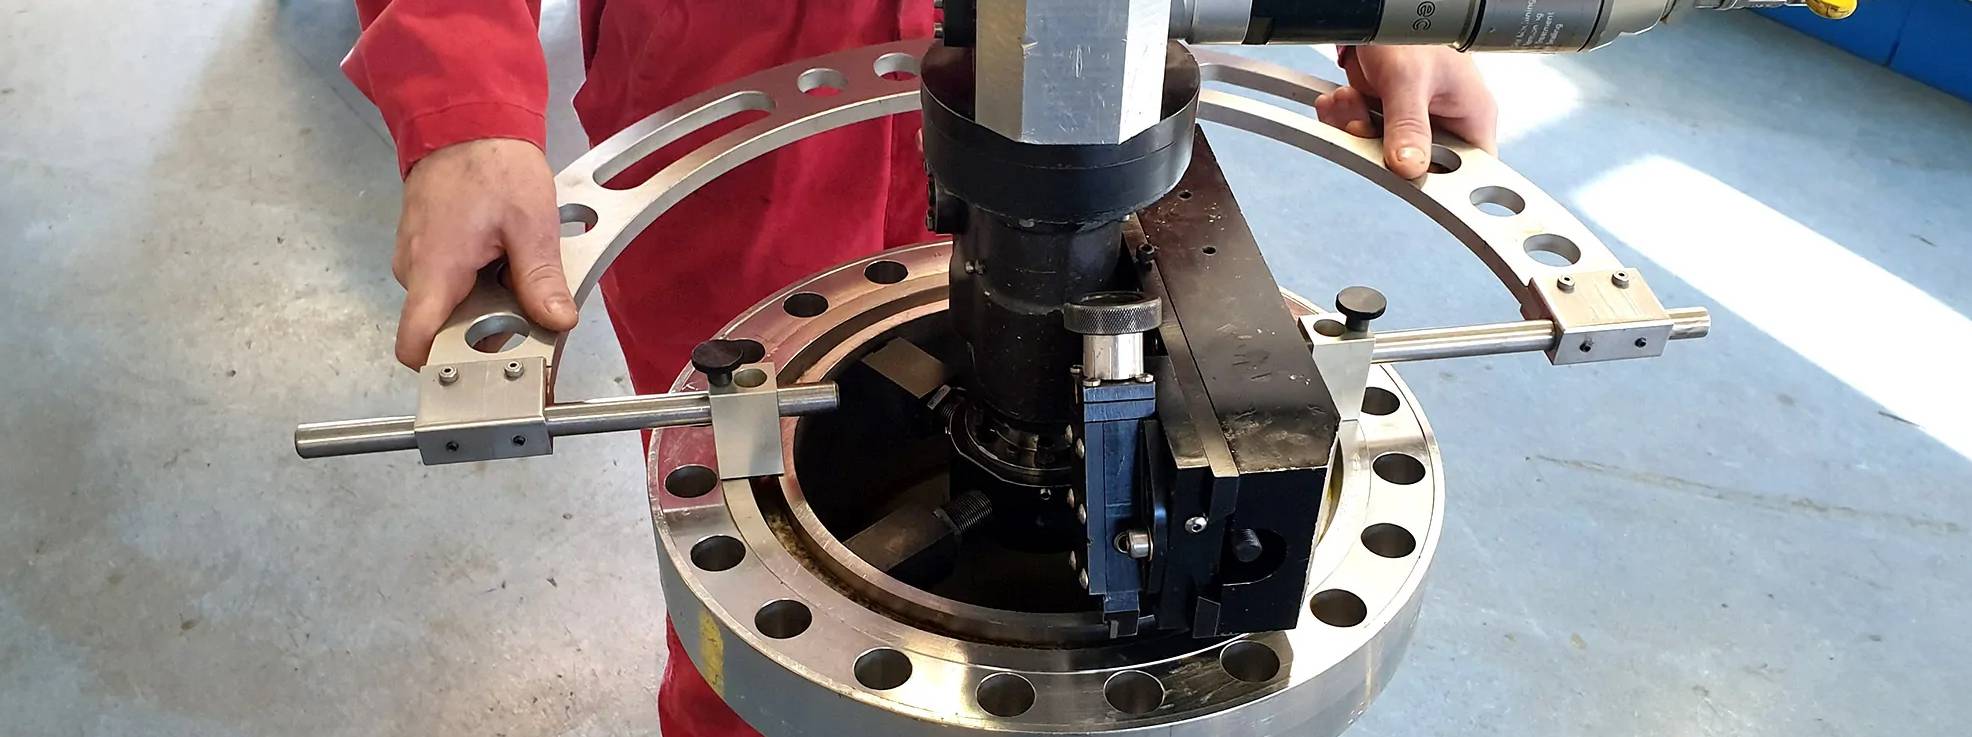 Measuring flange groove with the Normaco Measuring acr